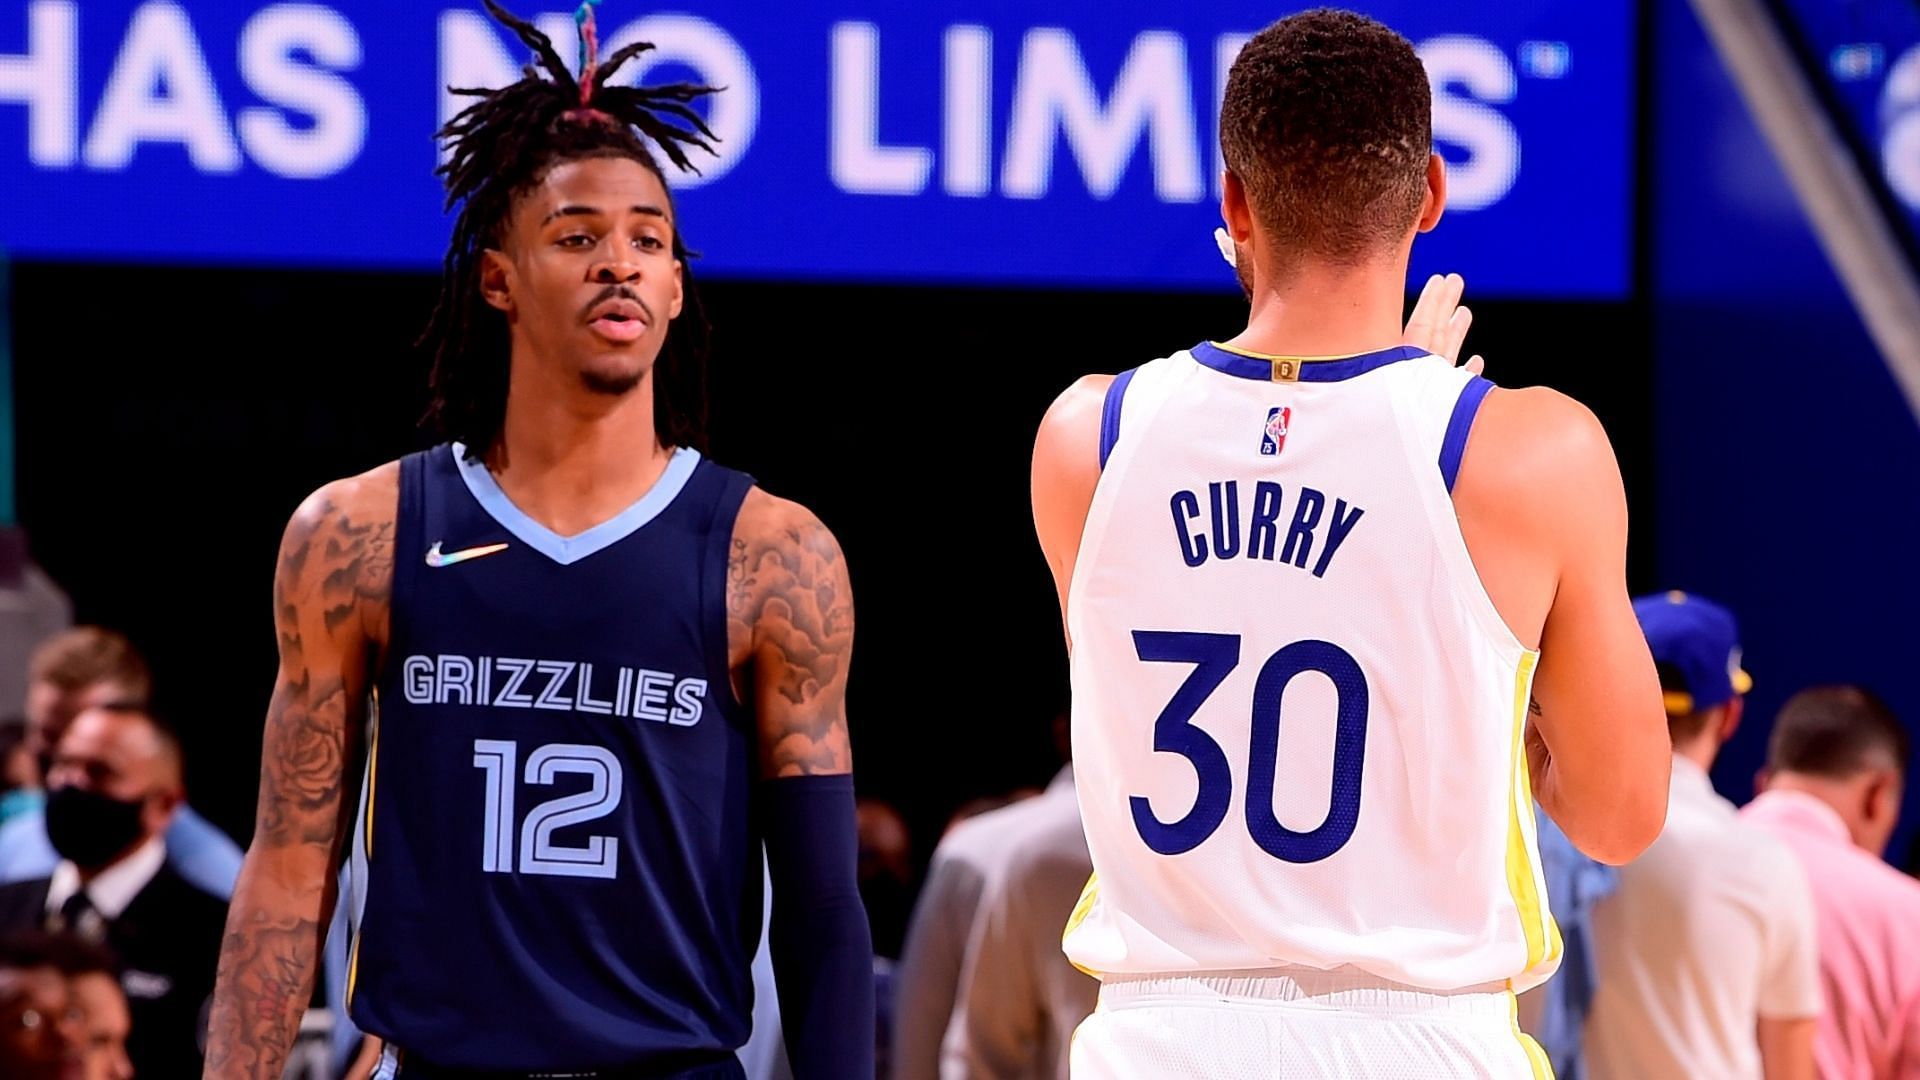 Ja Morant and the Memphis Grizzlies will visit Steph Curry and the Golden State Warriors for Games 3 and 4. [Photo: Sporting News]